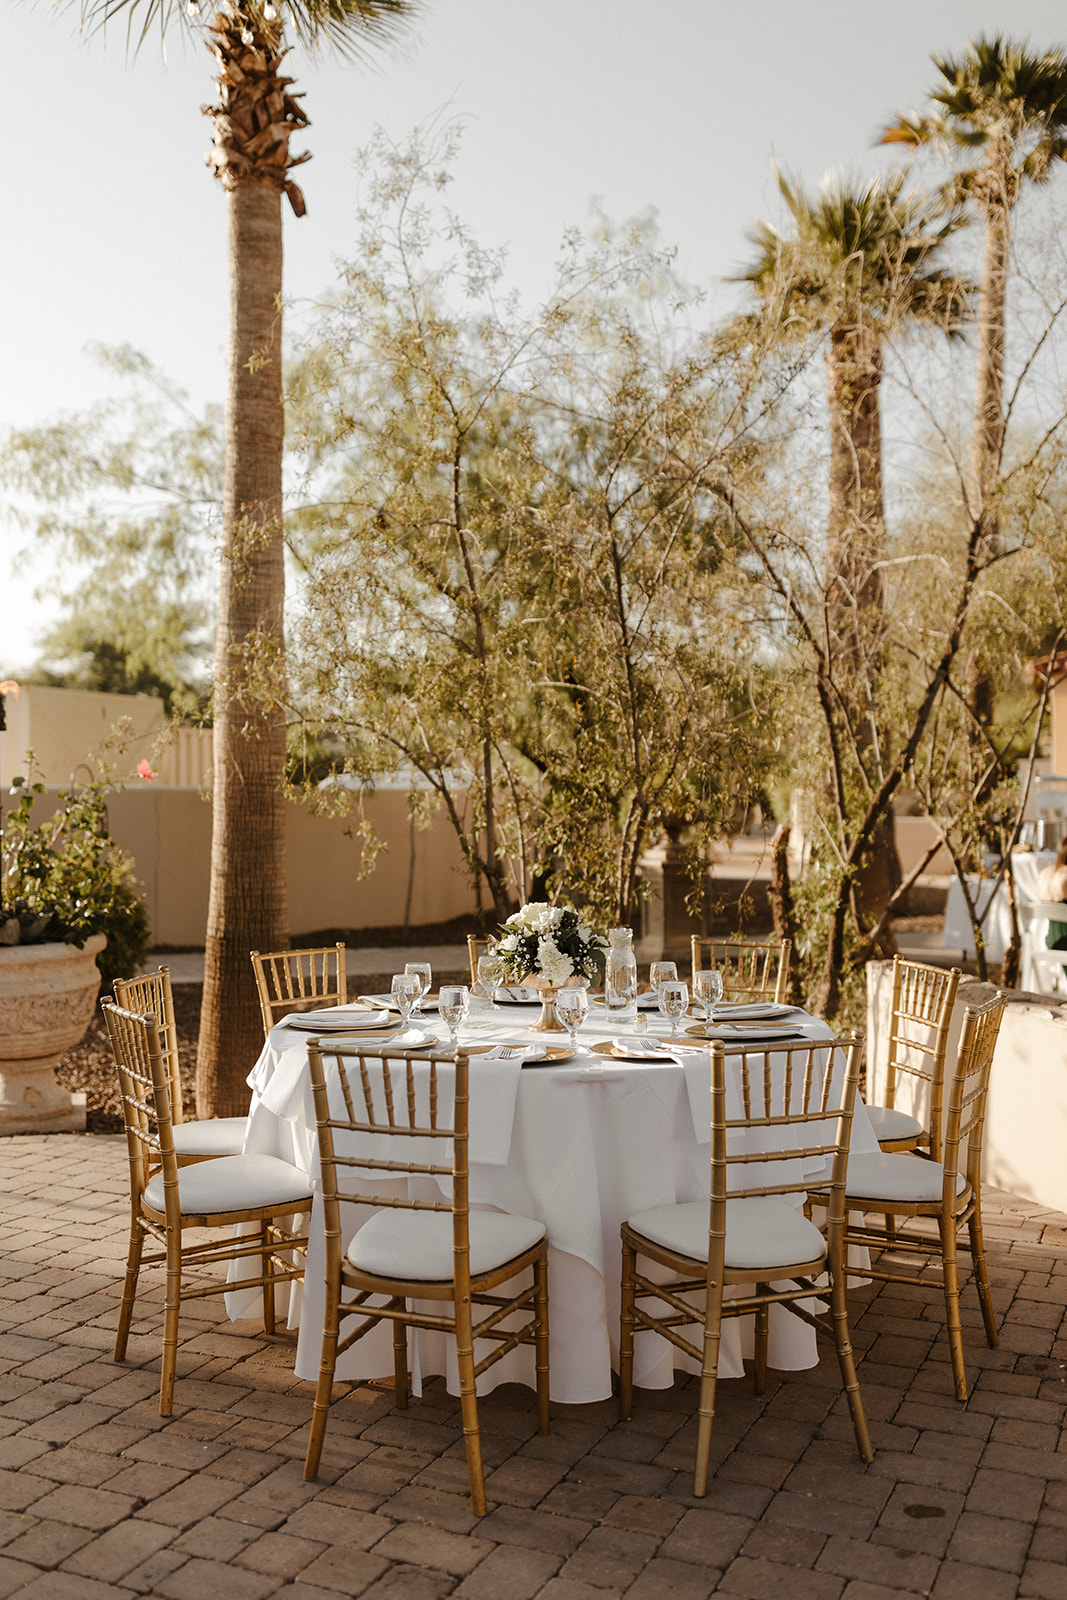 The secret garden event center all set up and ready for the Arizona wedding day